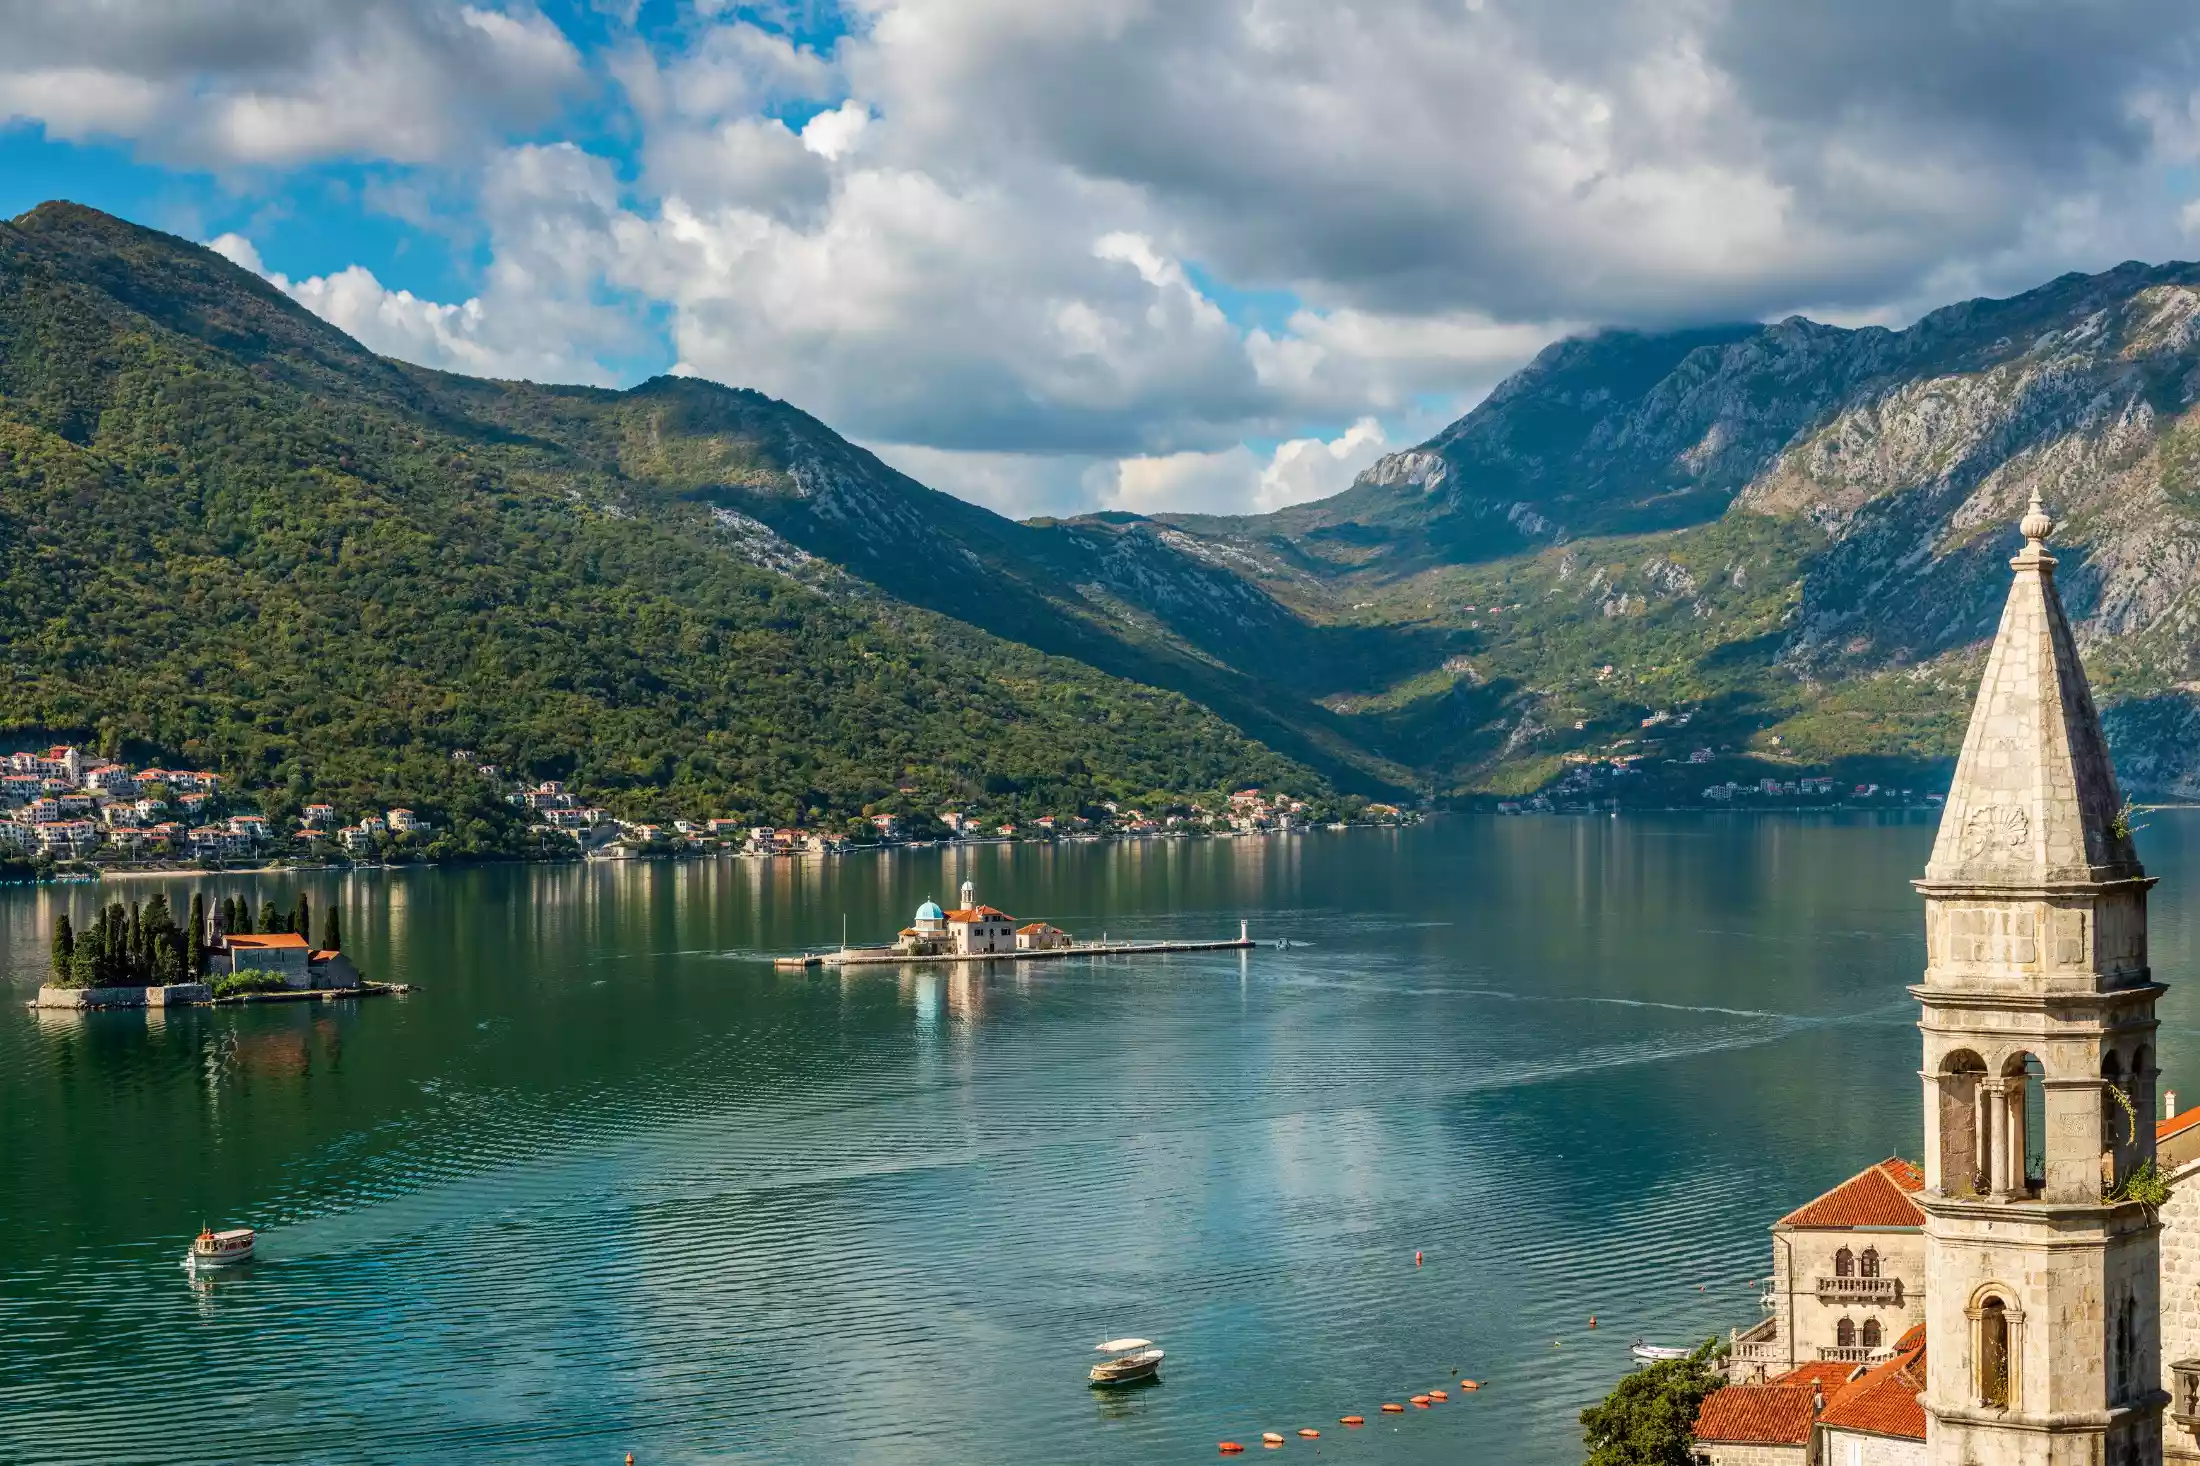 A view of Perast Montenegro from above, showing Our Lady of the Rocks island, the Gospa od Škrpjela Church situated on the island of St. George and the St. Nicholas church's bell tower.